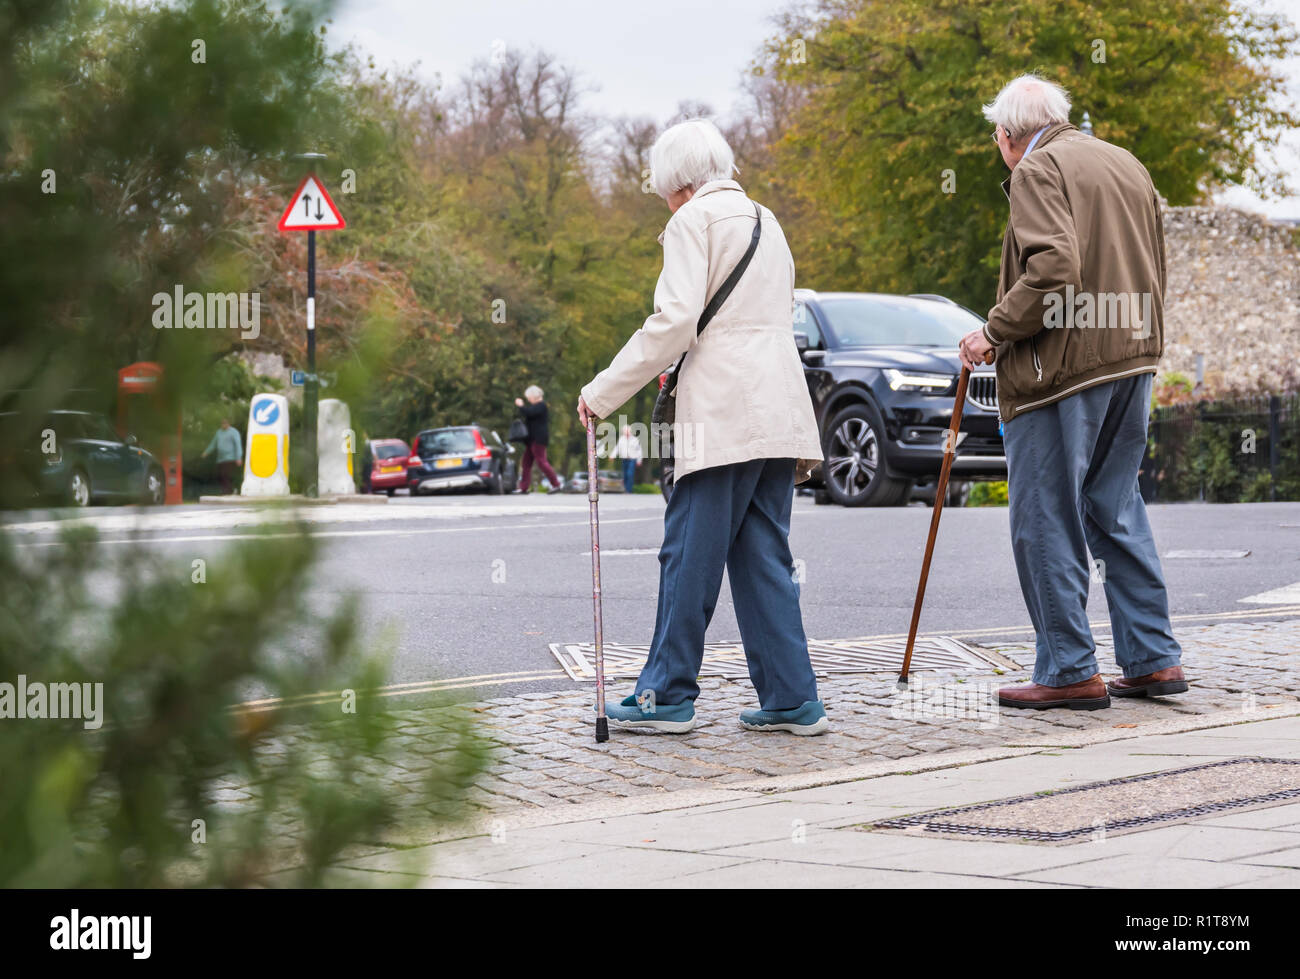 Senior couple of people with walking sticks crossing a road in the UK. Stock Photo